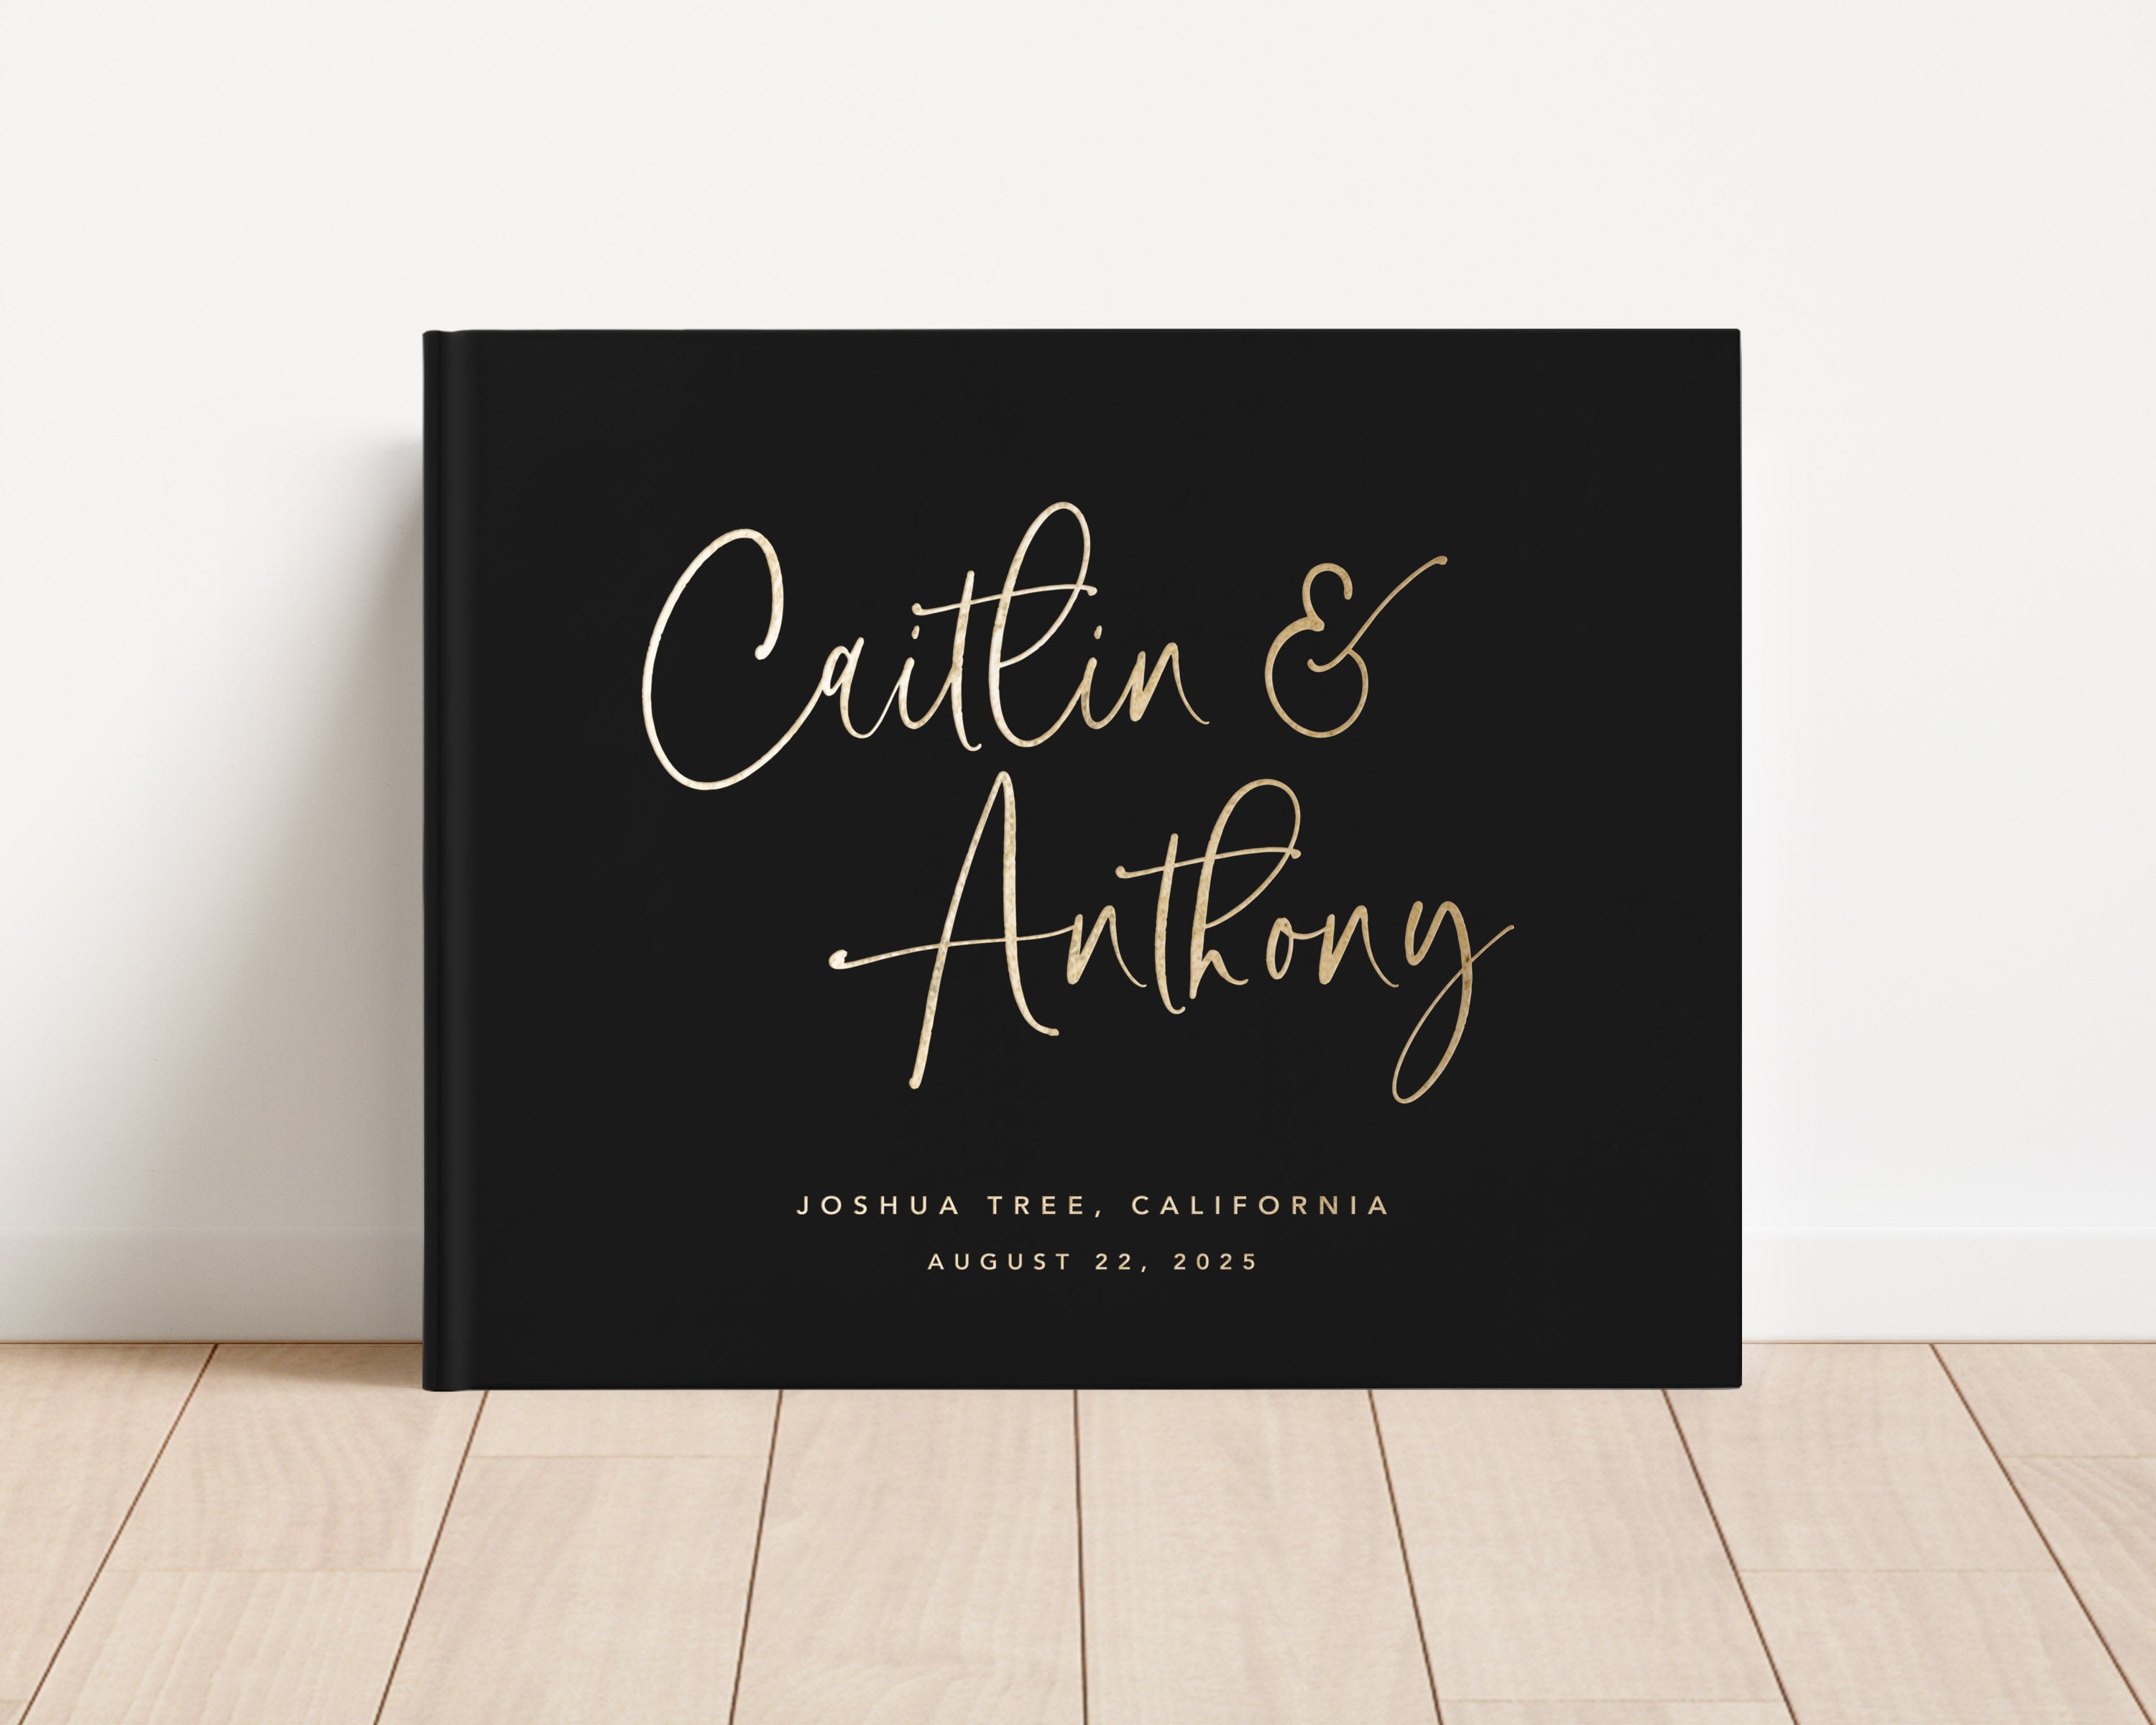 Luxury wedding guest book with custom gold foil text and black hardback cover.